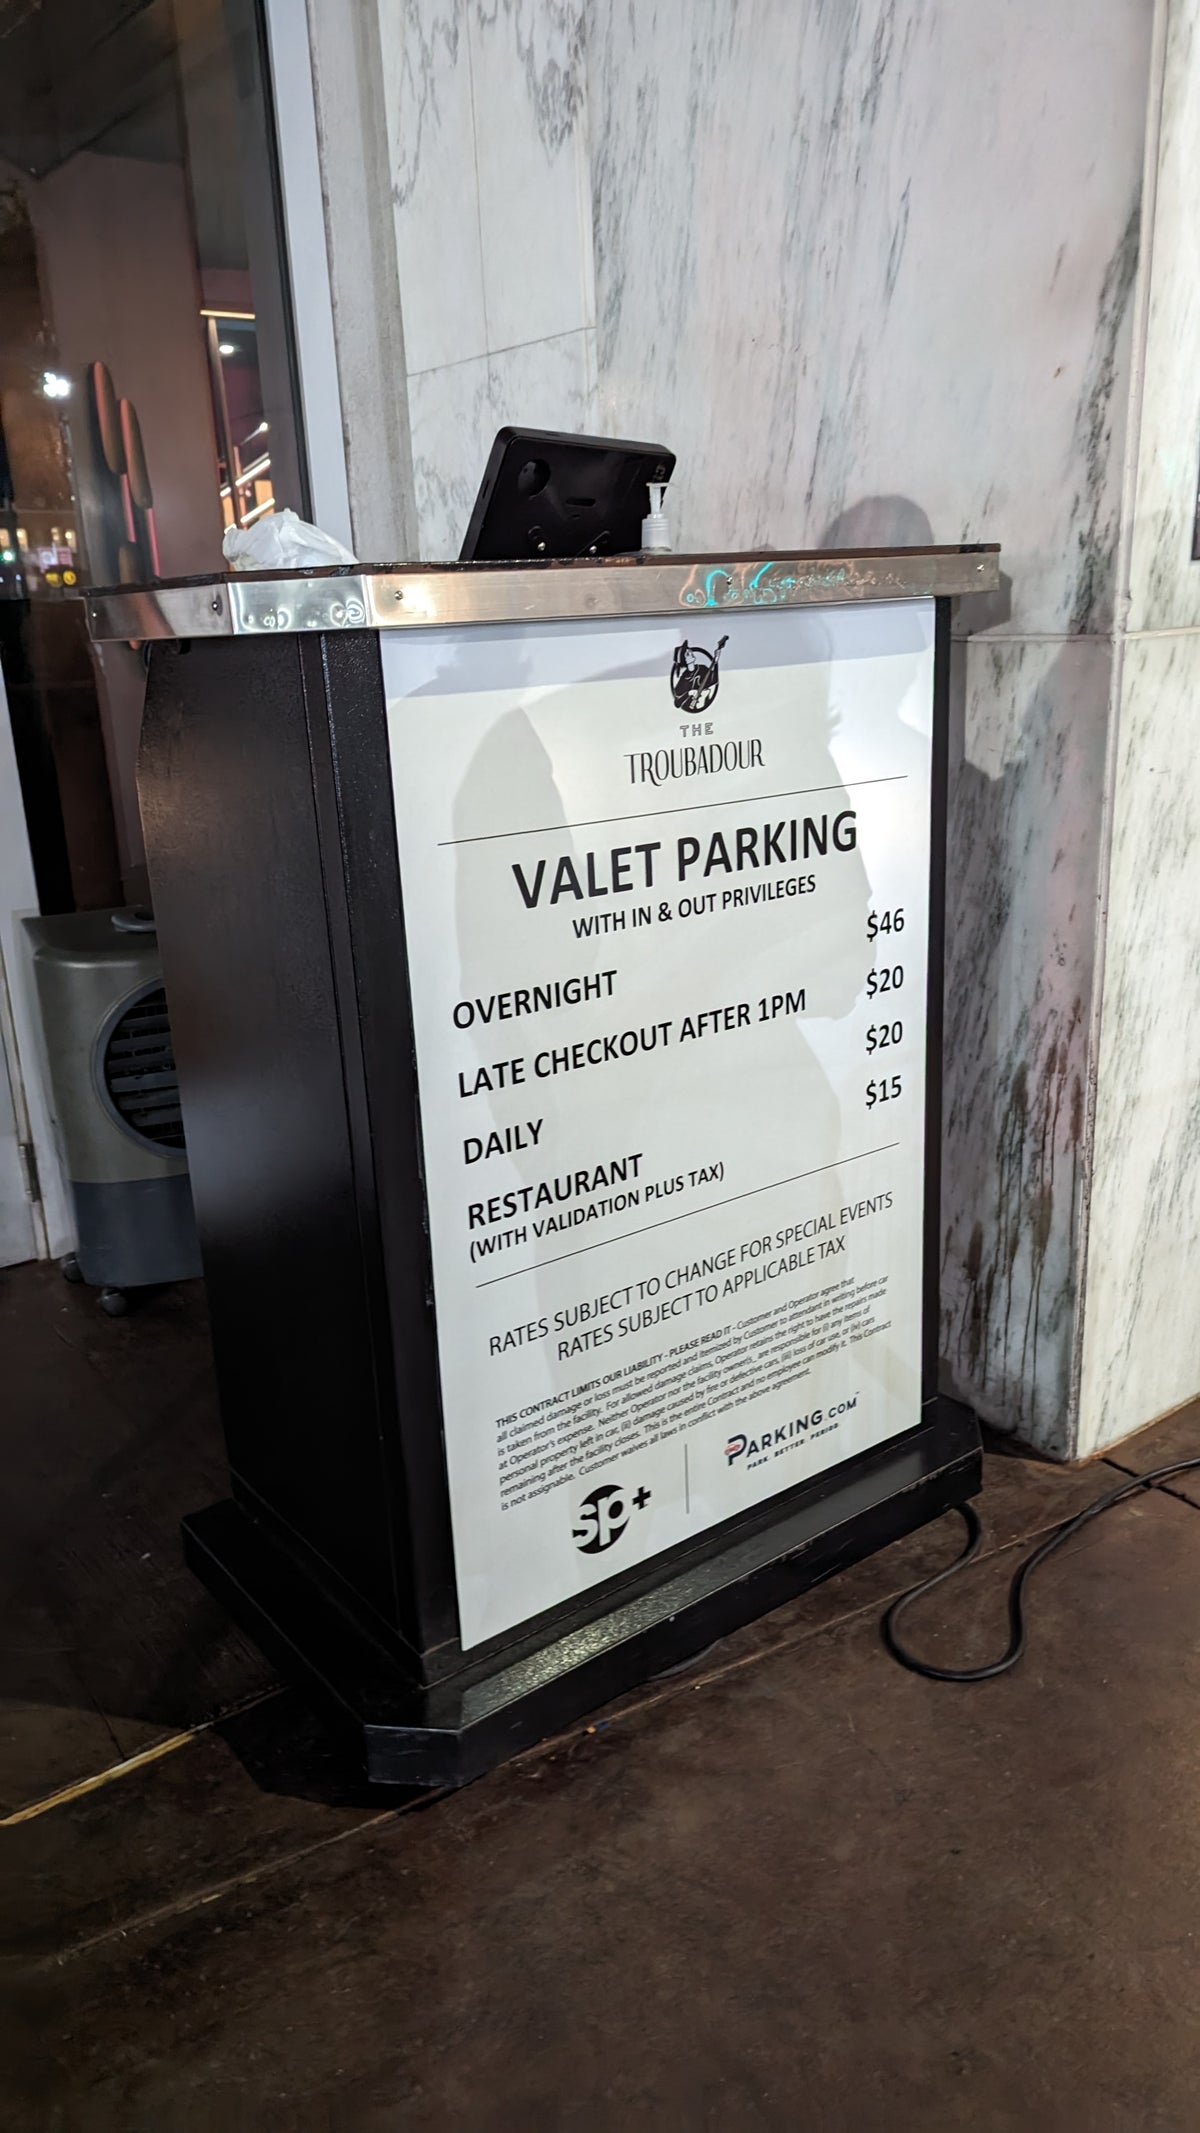 The Troubadour Hotel New Orleans amenities valet parking rates